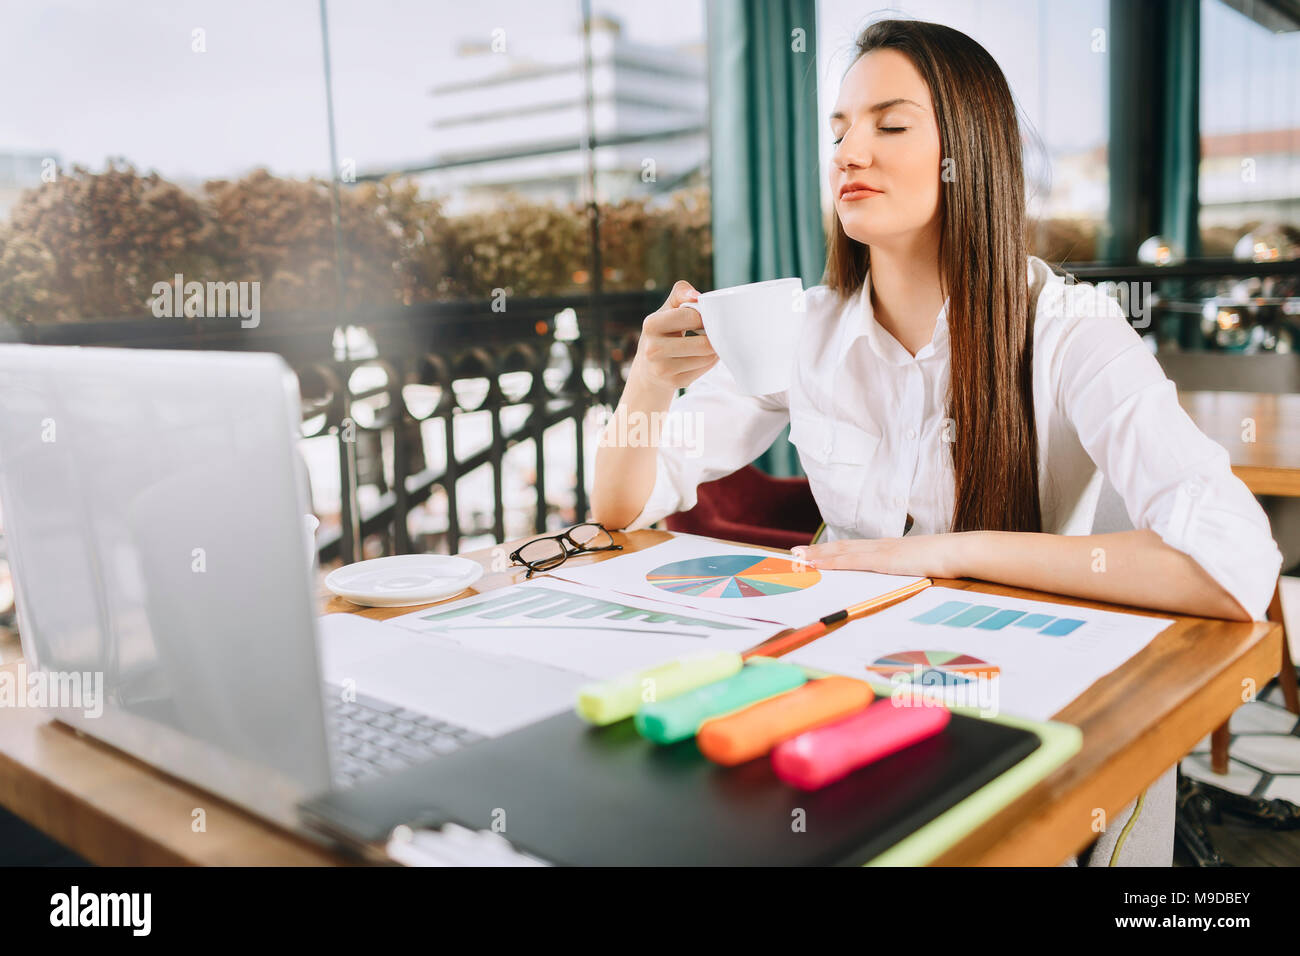 Businesswoman or young female with glasses making coffee pause at job. Coffee relaxation concept. Stock Photo